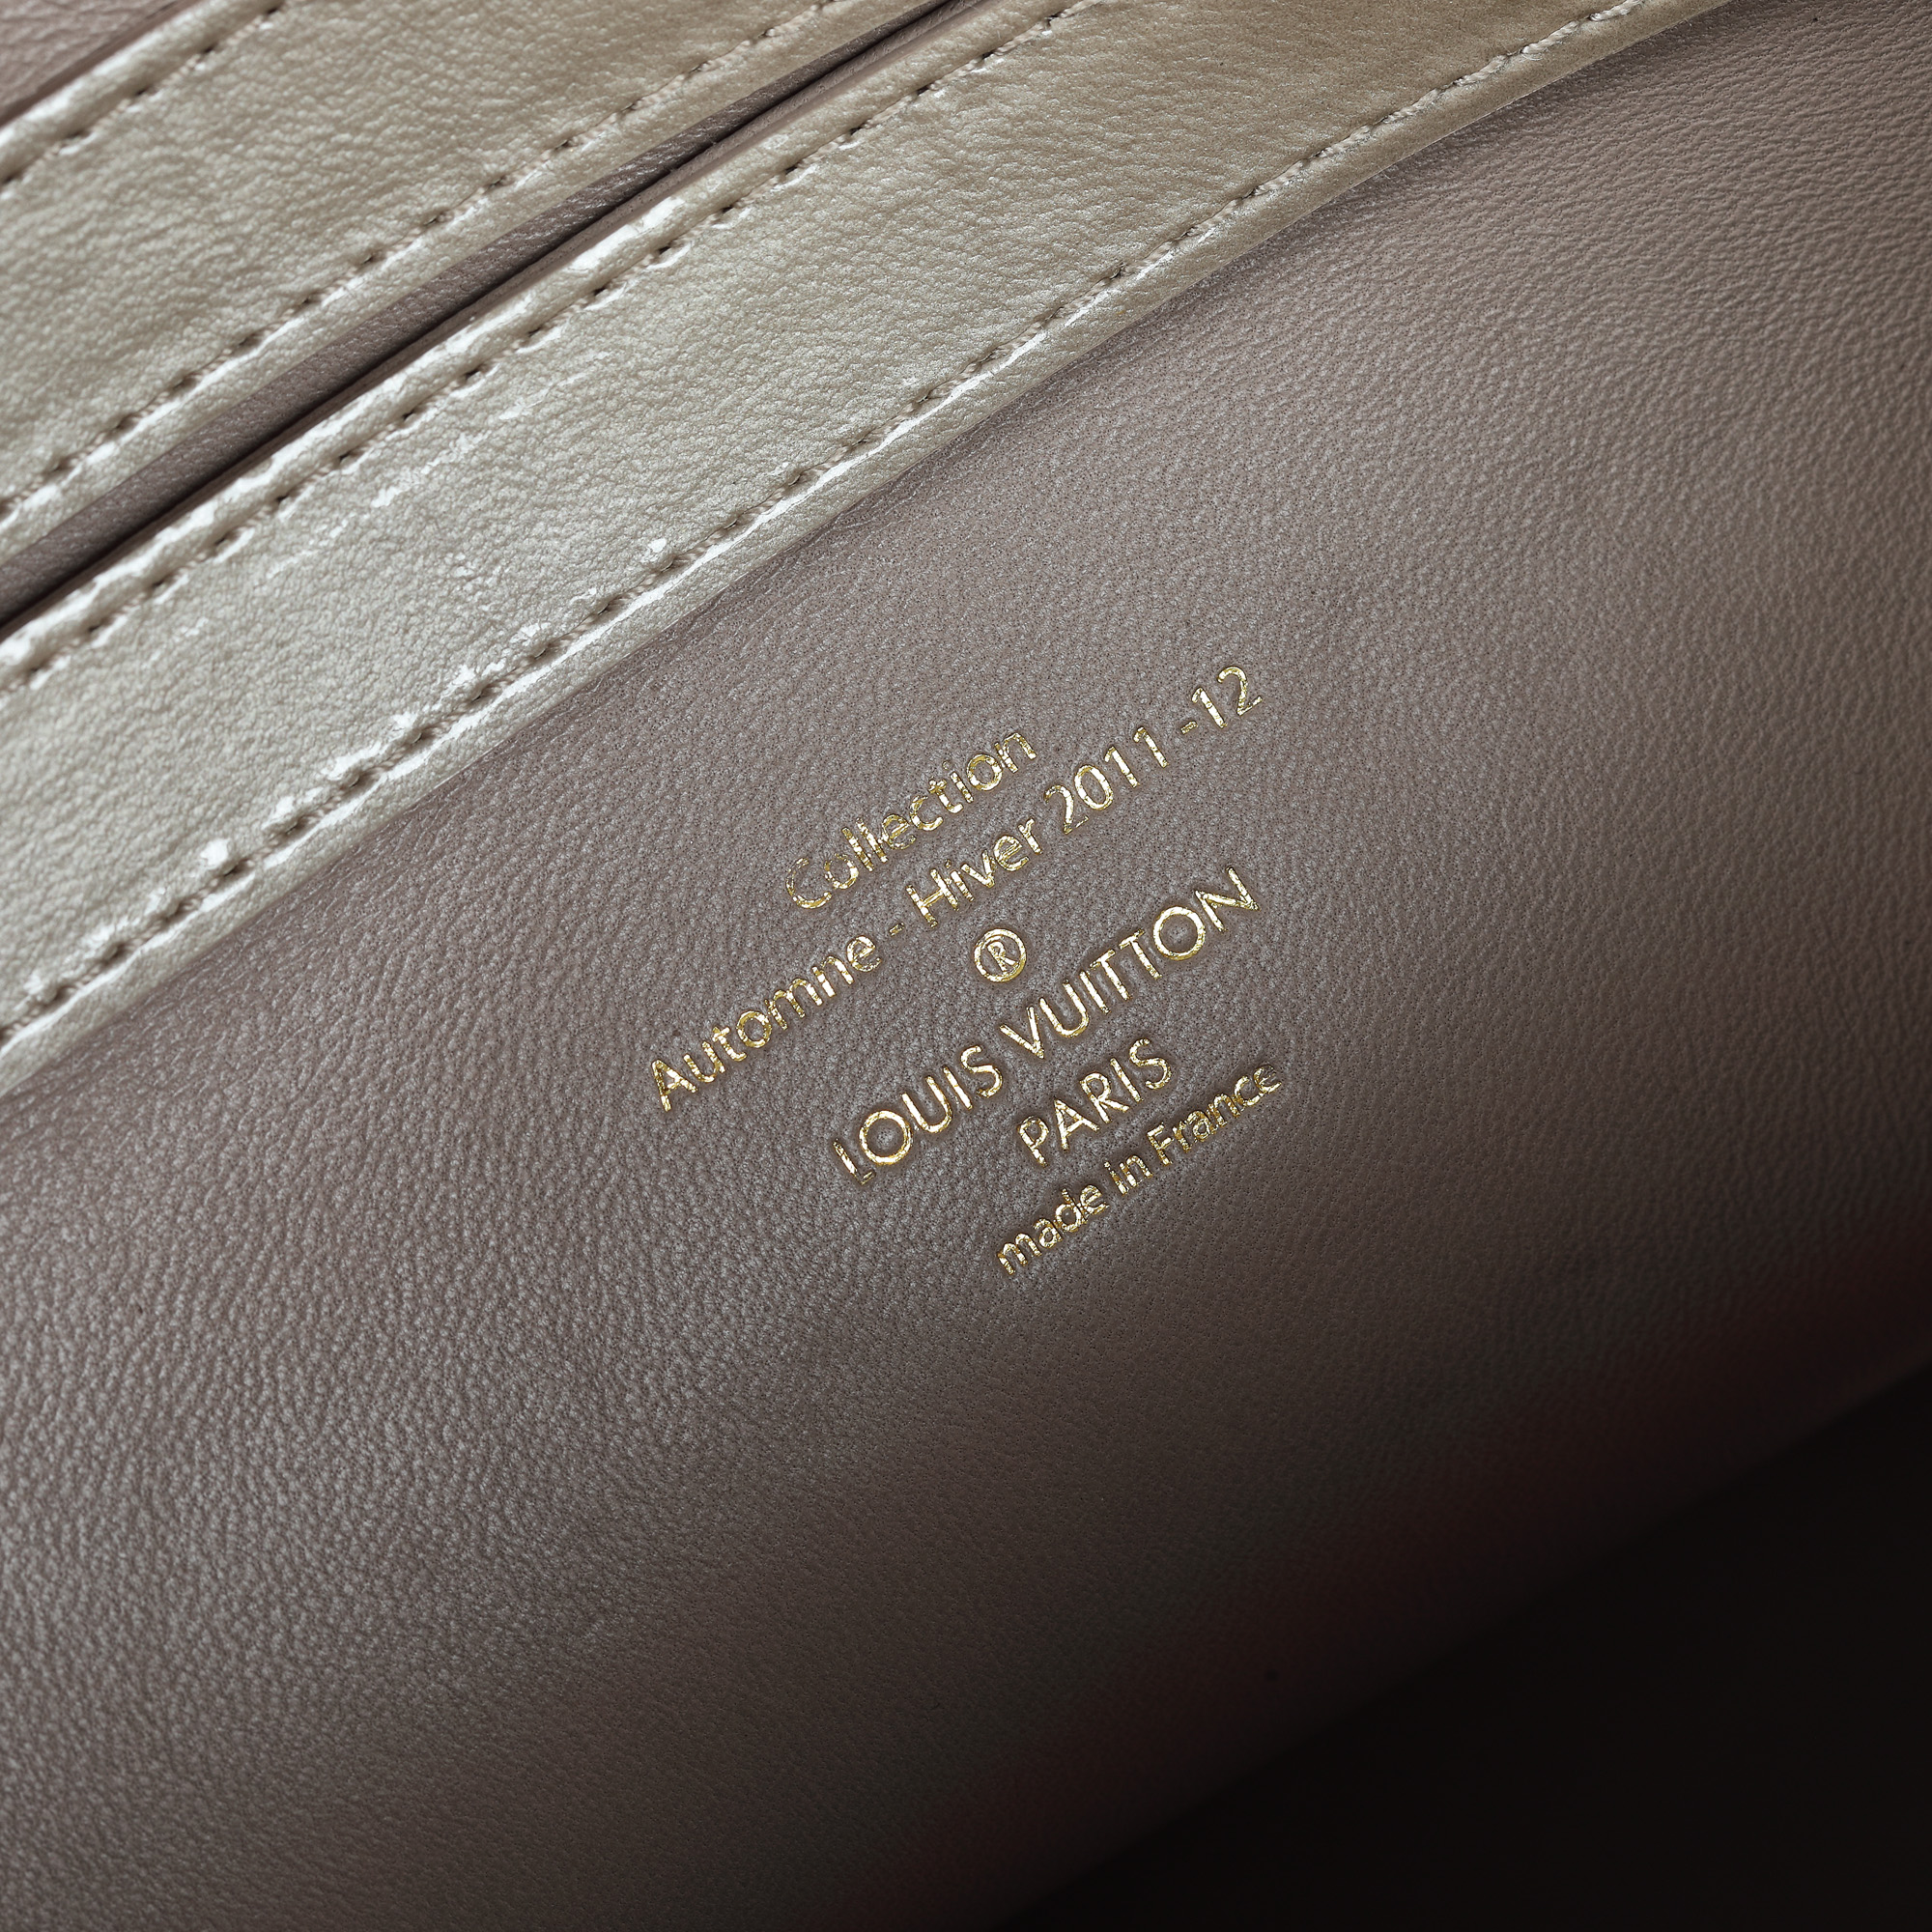 "Fascination Lockit Bag" - Louis Vuitton bag, leather, beige, embroidered monogram, limited edition, - Image 4 of 5